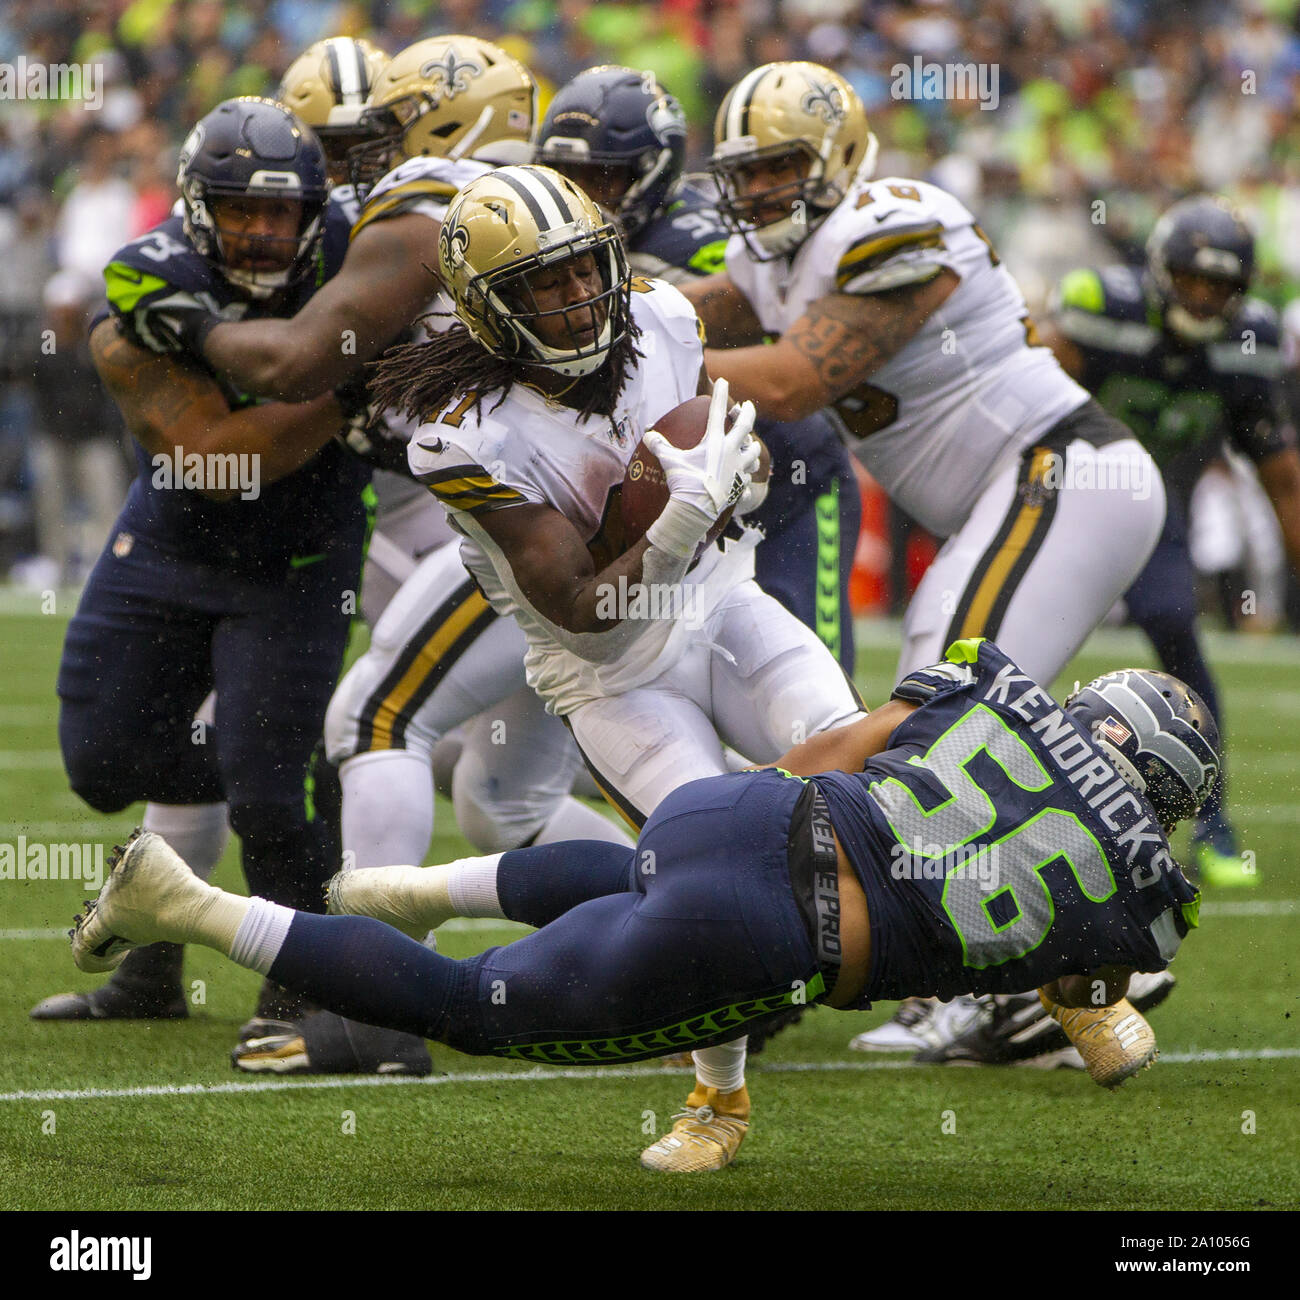 Seattle, USA. 22nd Sep, 2019. New Orleans Saints running back Alvin Kamara (41) breaks a tackle by Seattle Seahawks linebacker Mychal Kendricks (56) and runs for a 21-yard gain during the third quarter at CenturyLink Field on Sunday, September 22, 2019 in Seattle, Washington. New Orleans Saints beat the Seattle Seahawks 33-27. Photo by Jim Bryant/UPI Credit: UPI/Alamy Live News Stock Photo